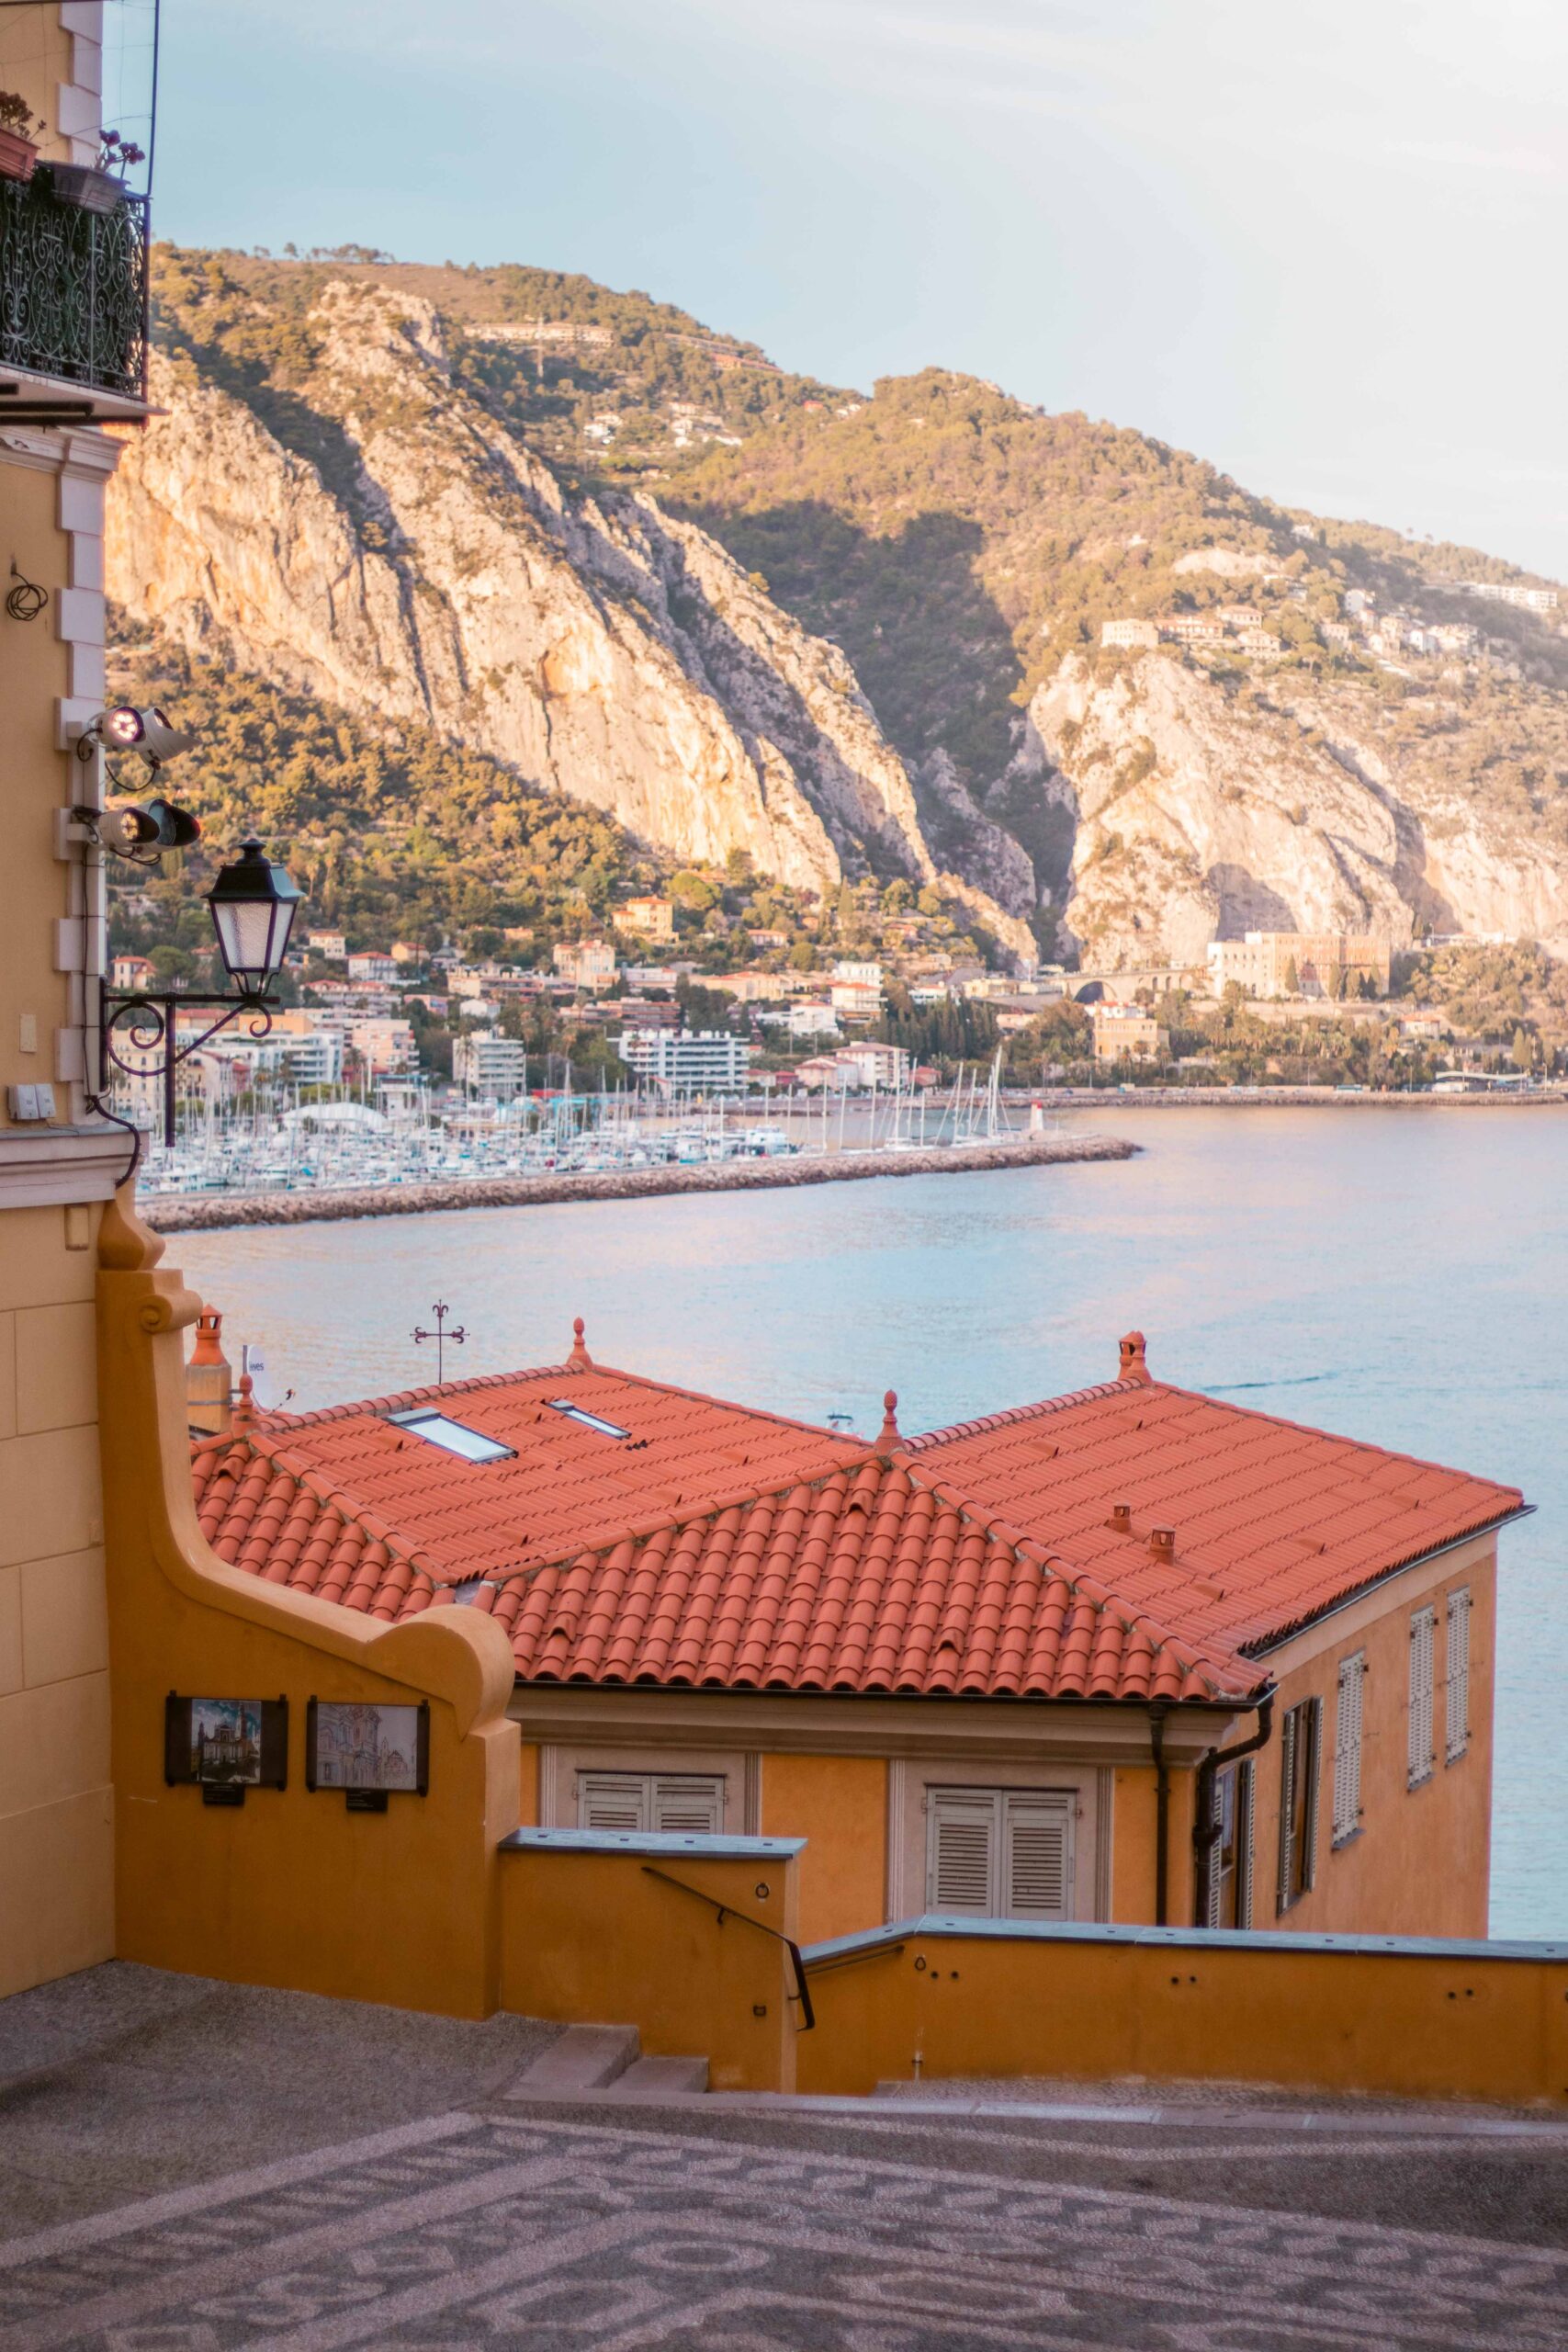 View of cliffs, Menton Port and yellow house rooftop as seen from the Basilica of Saint Michael Archangel Basilica place in Menton, France